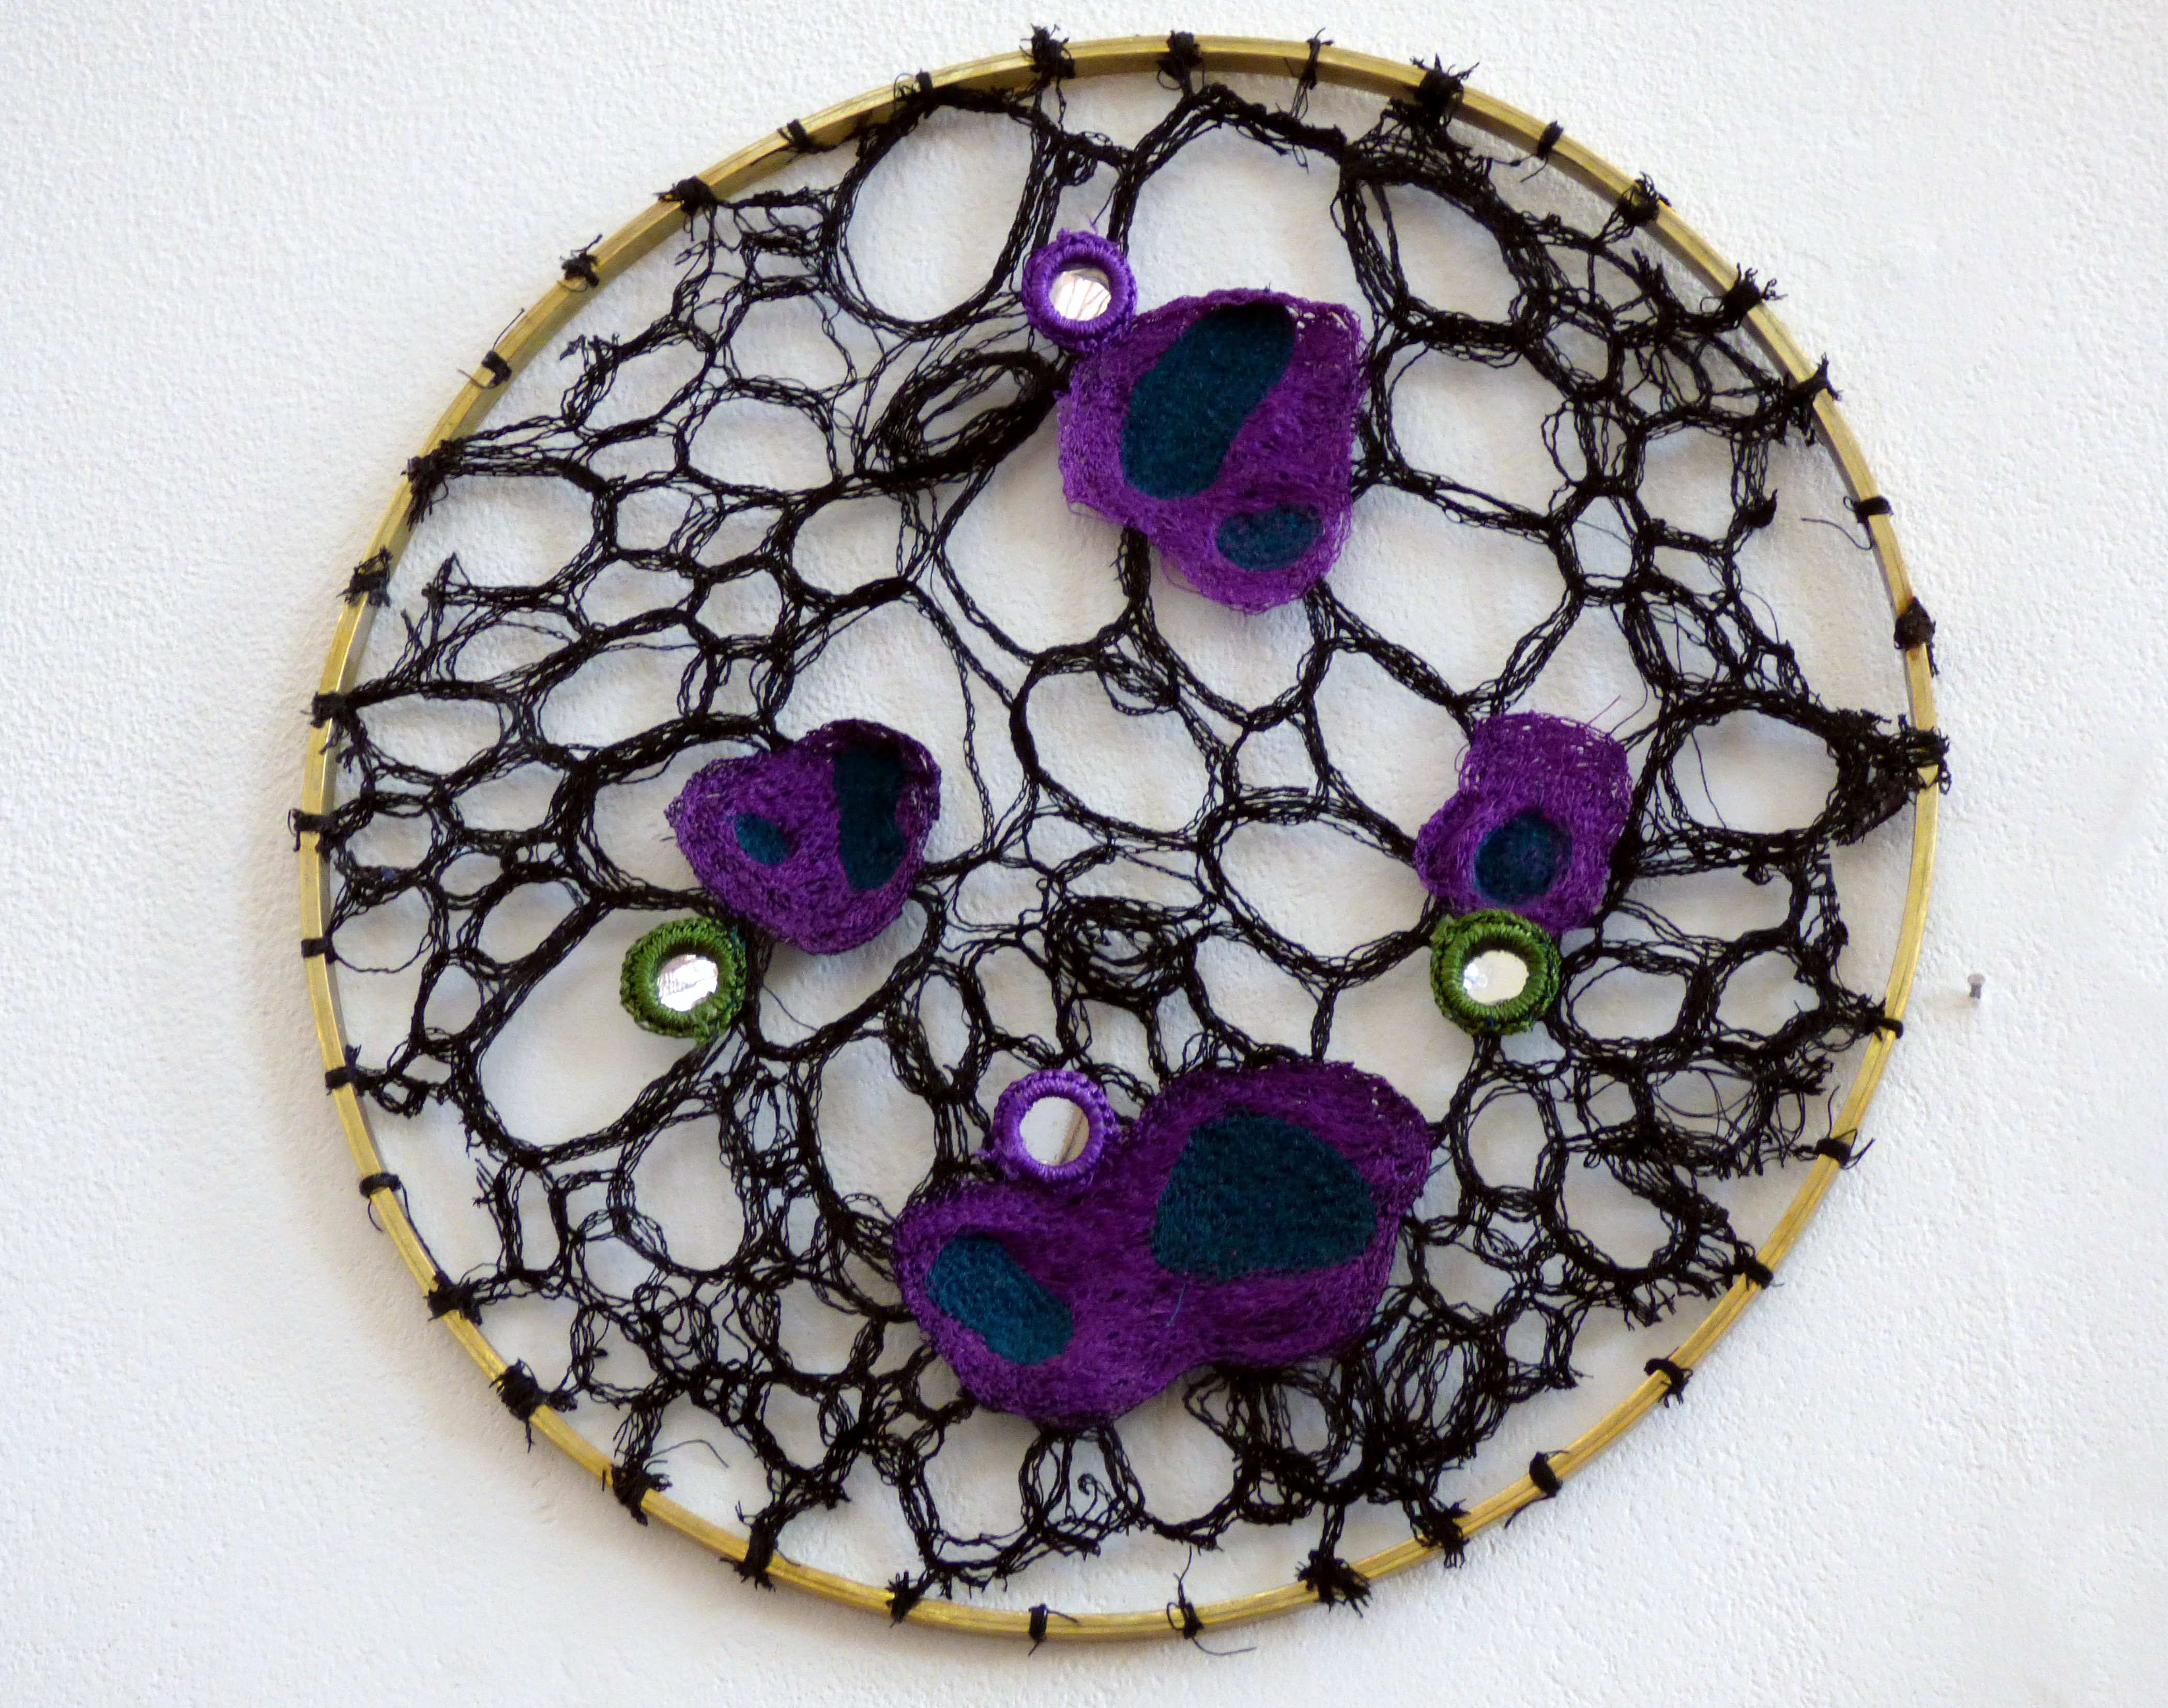 machine embroidered designs based on bacterium by Alexandra Roberts at Hope Univ Degree Show 2017